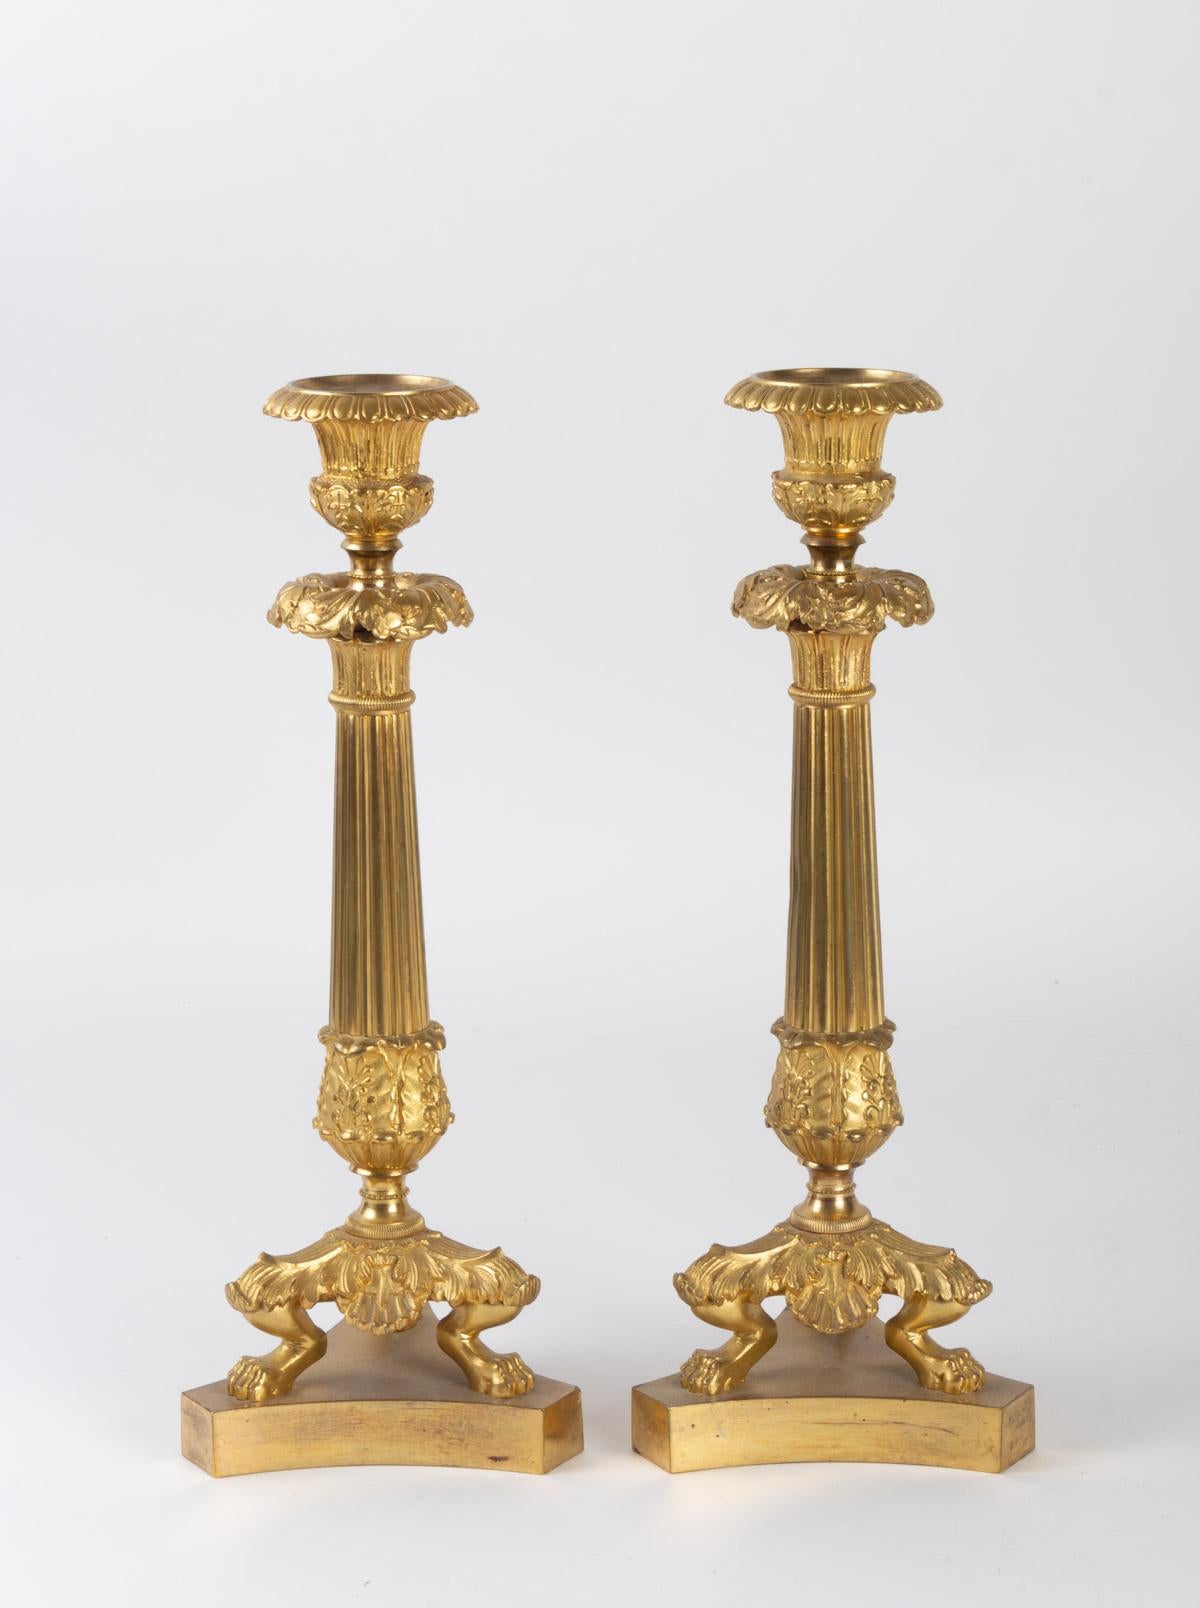 Pair of Empire style gilt bronze candleholders with their bobèches, 19th century

Measures: H 32cm, D 12cm.